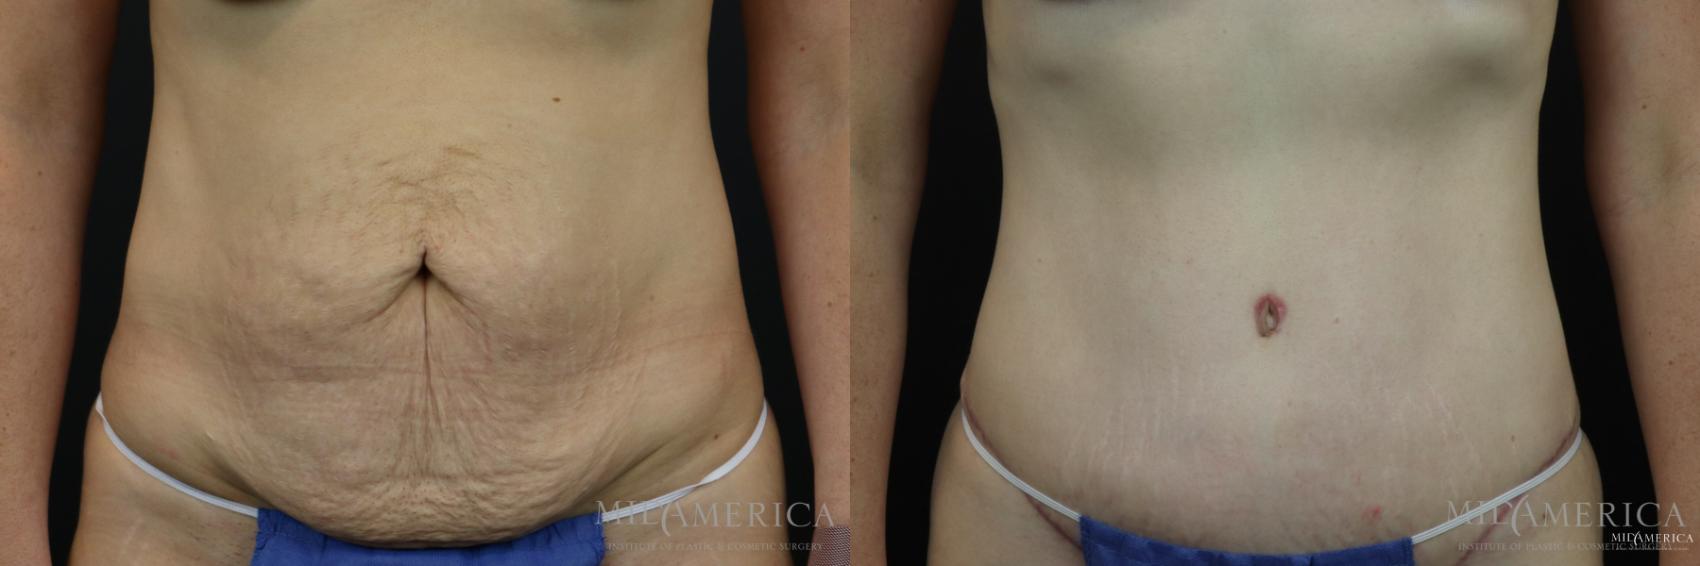 Tummy Tuck Before & After Photo Gallery | Glen Carbon, IL | MidAmerica  Plastic Surgery